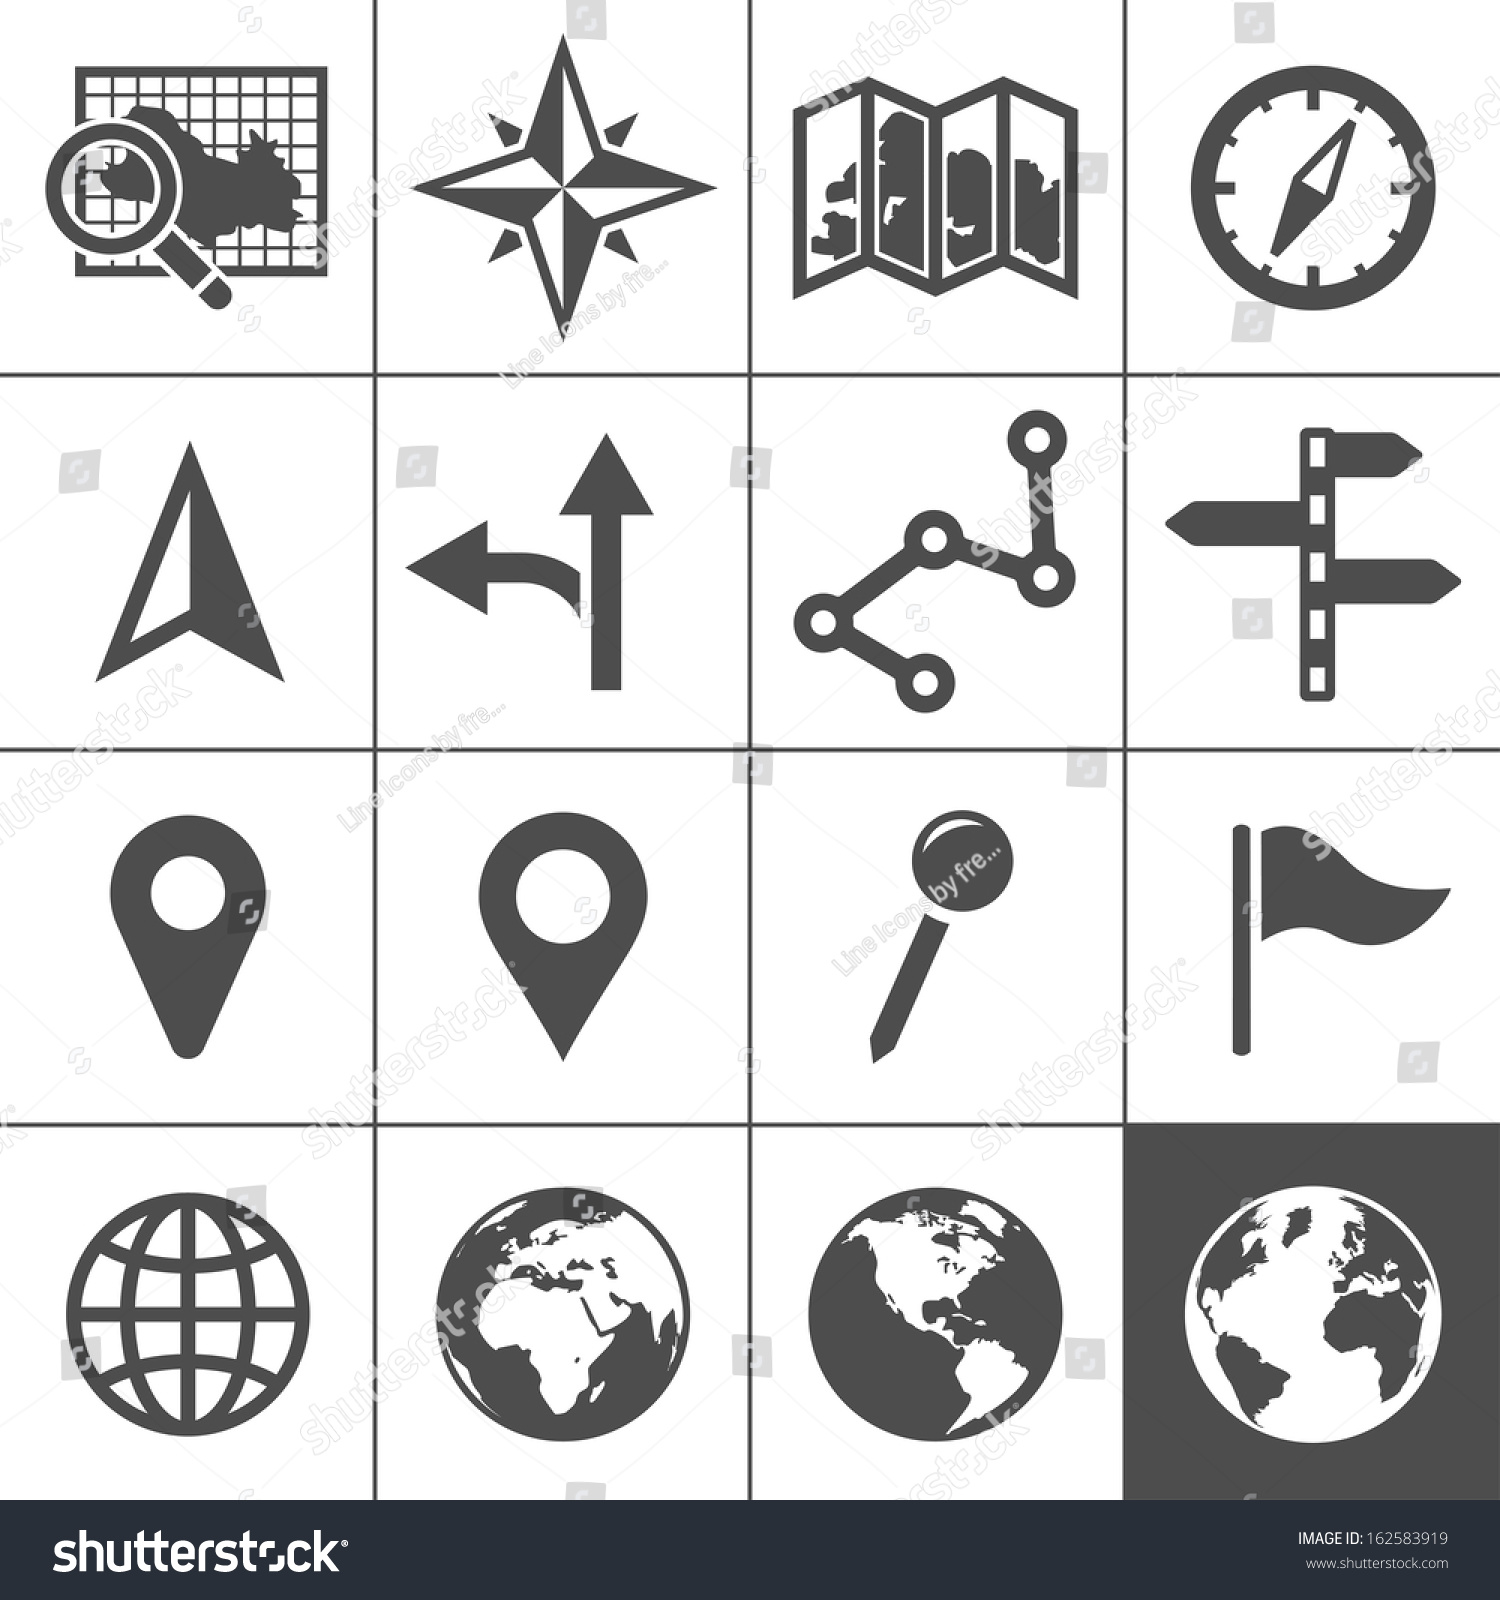 Cartography and topography icon set. Maps, location and navigation icons. Vector illustration. Simplus series #162583919